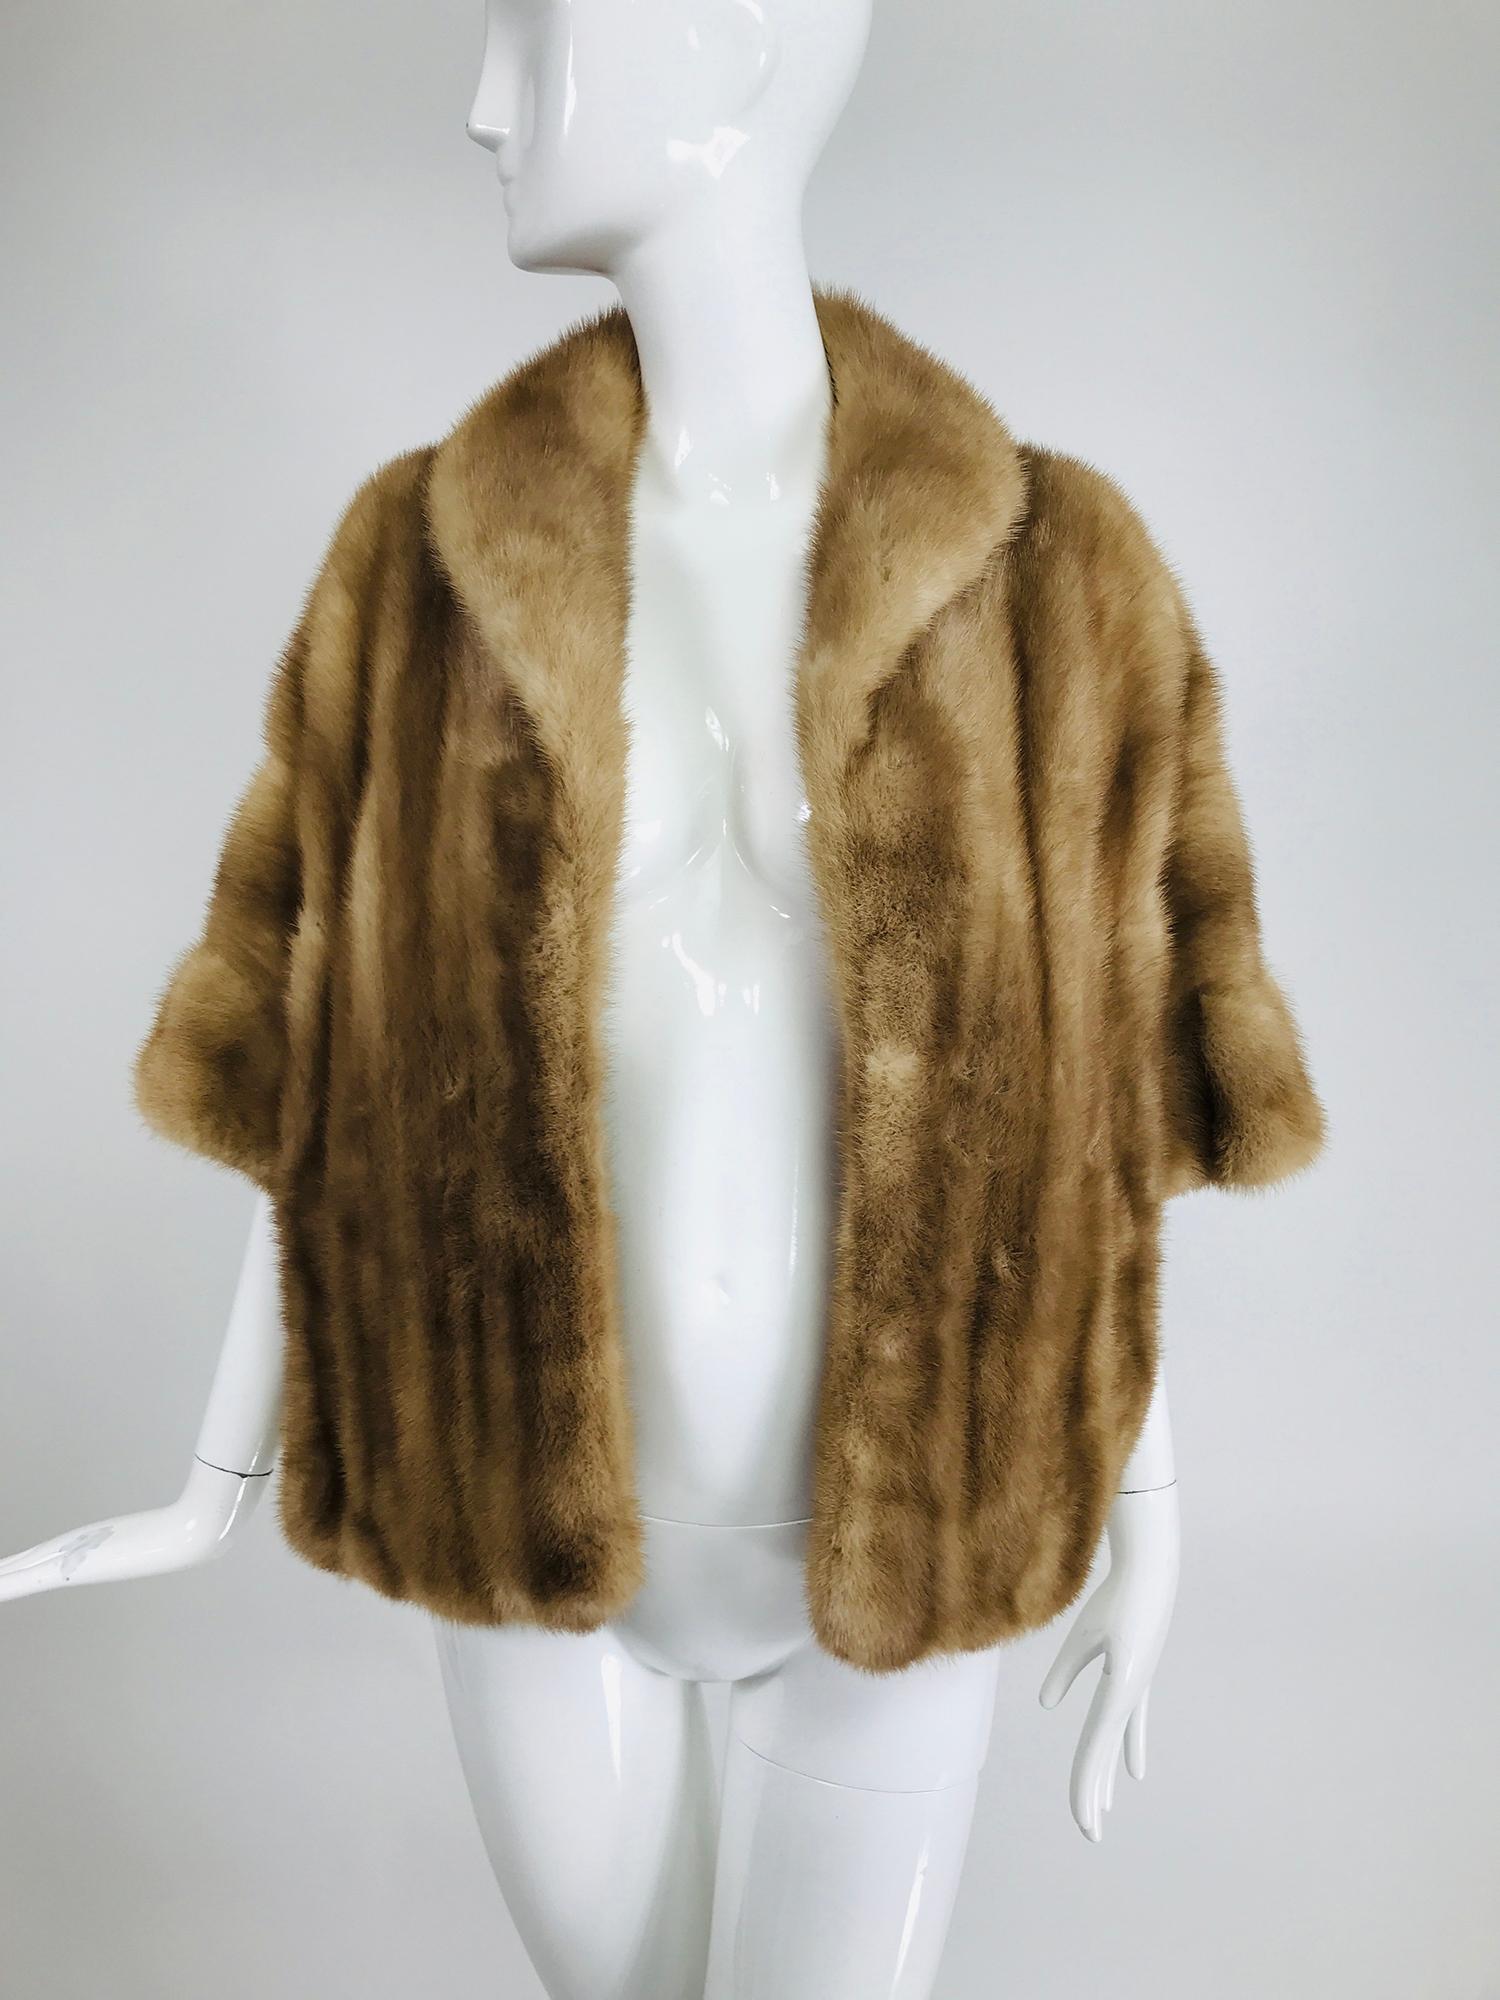 Vintage honey blond mink stole with hidden sleeves from the 1960s. Beautiful cape in a warm honey blond wear as a cape or snaps inside create short interior sleeves for a different look. The cape has a gathered draped hem effect. A shawl collar and